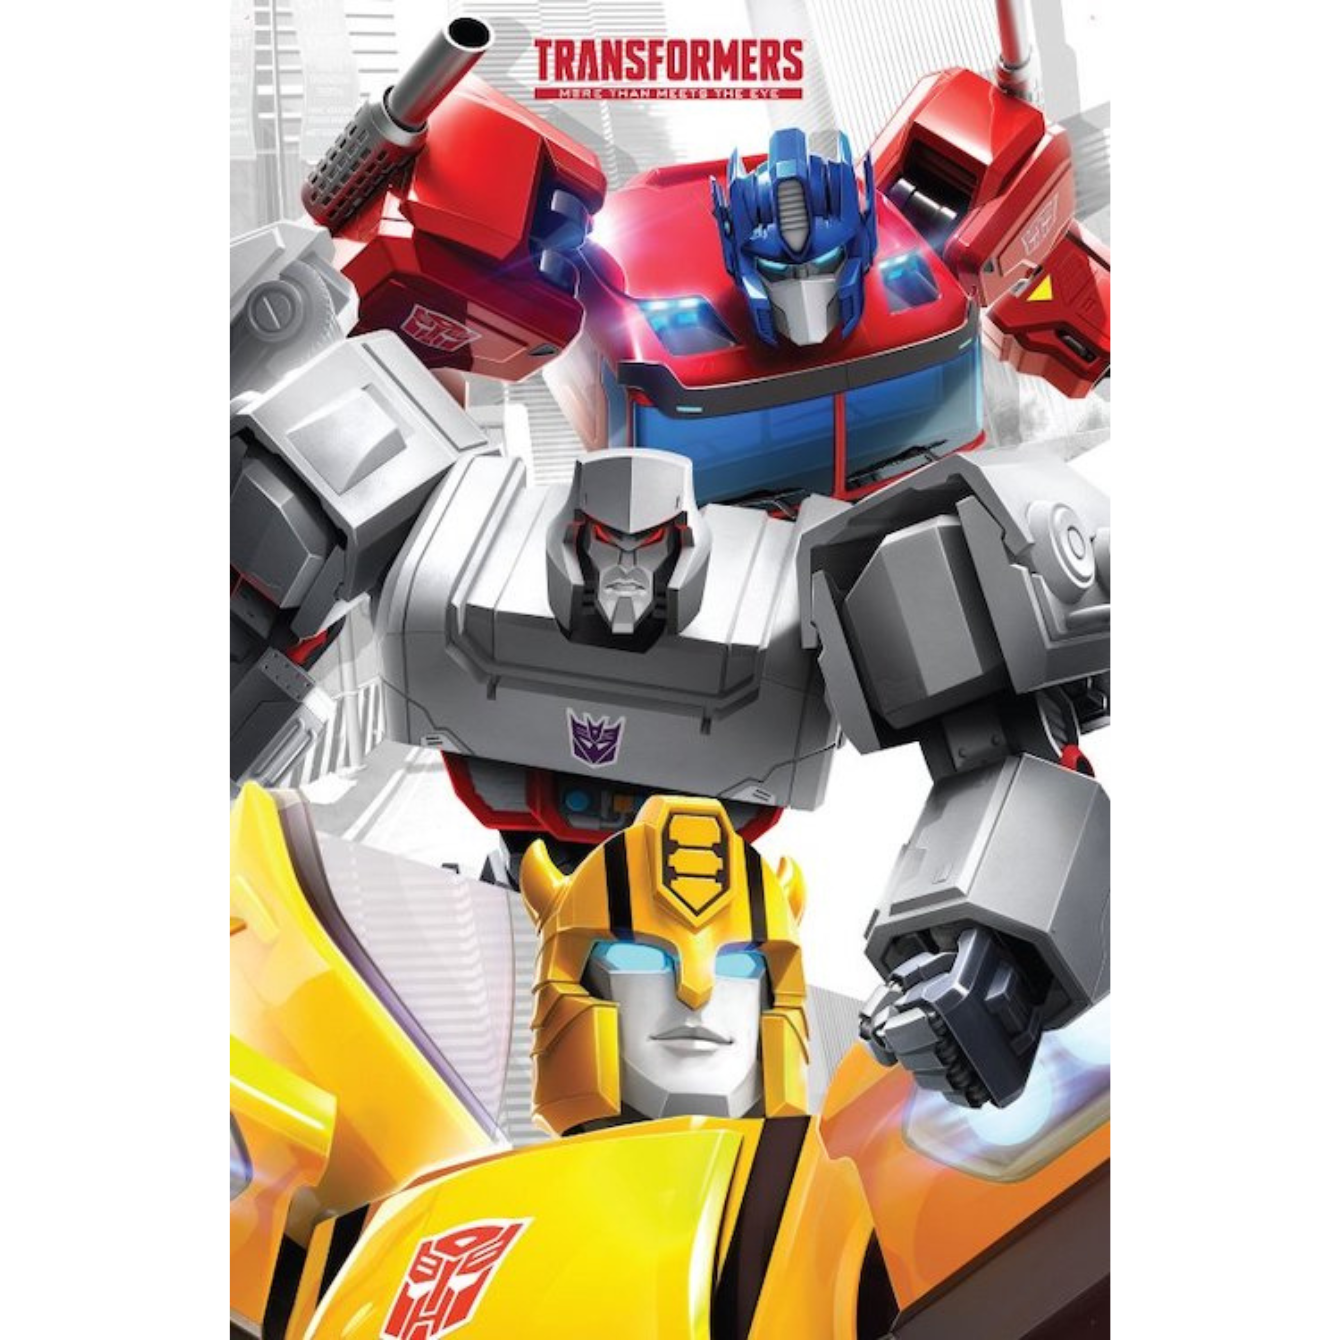 TRANSFORMERS Poster